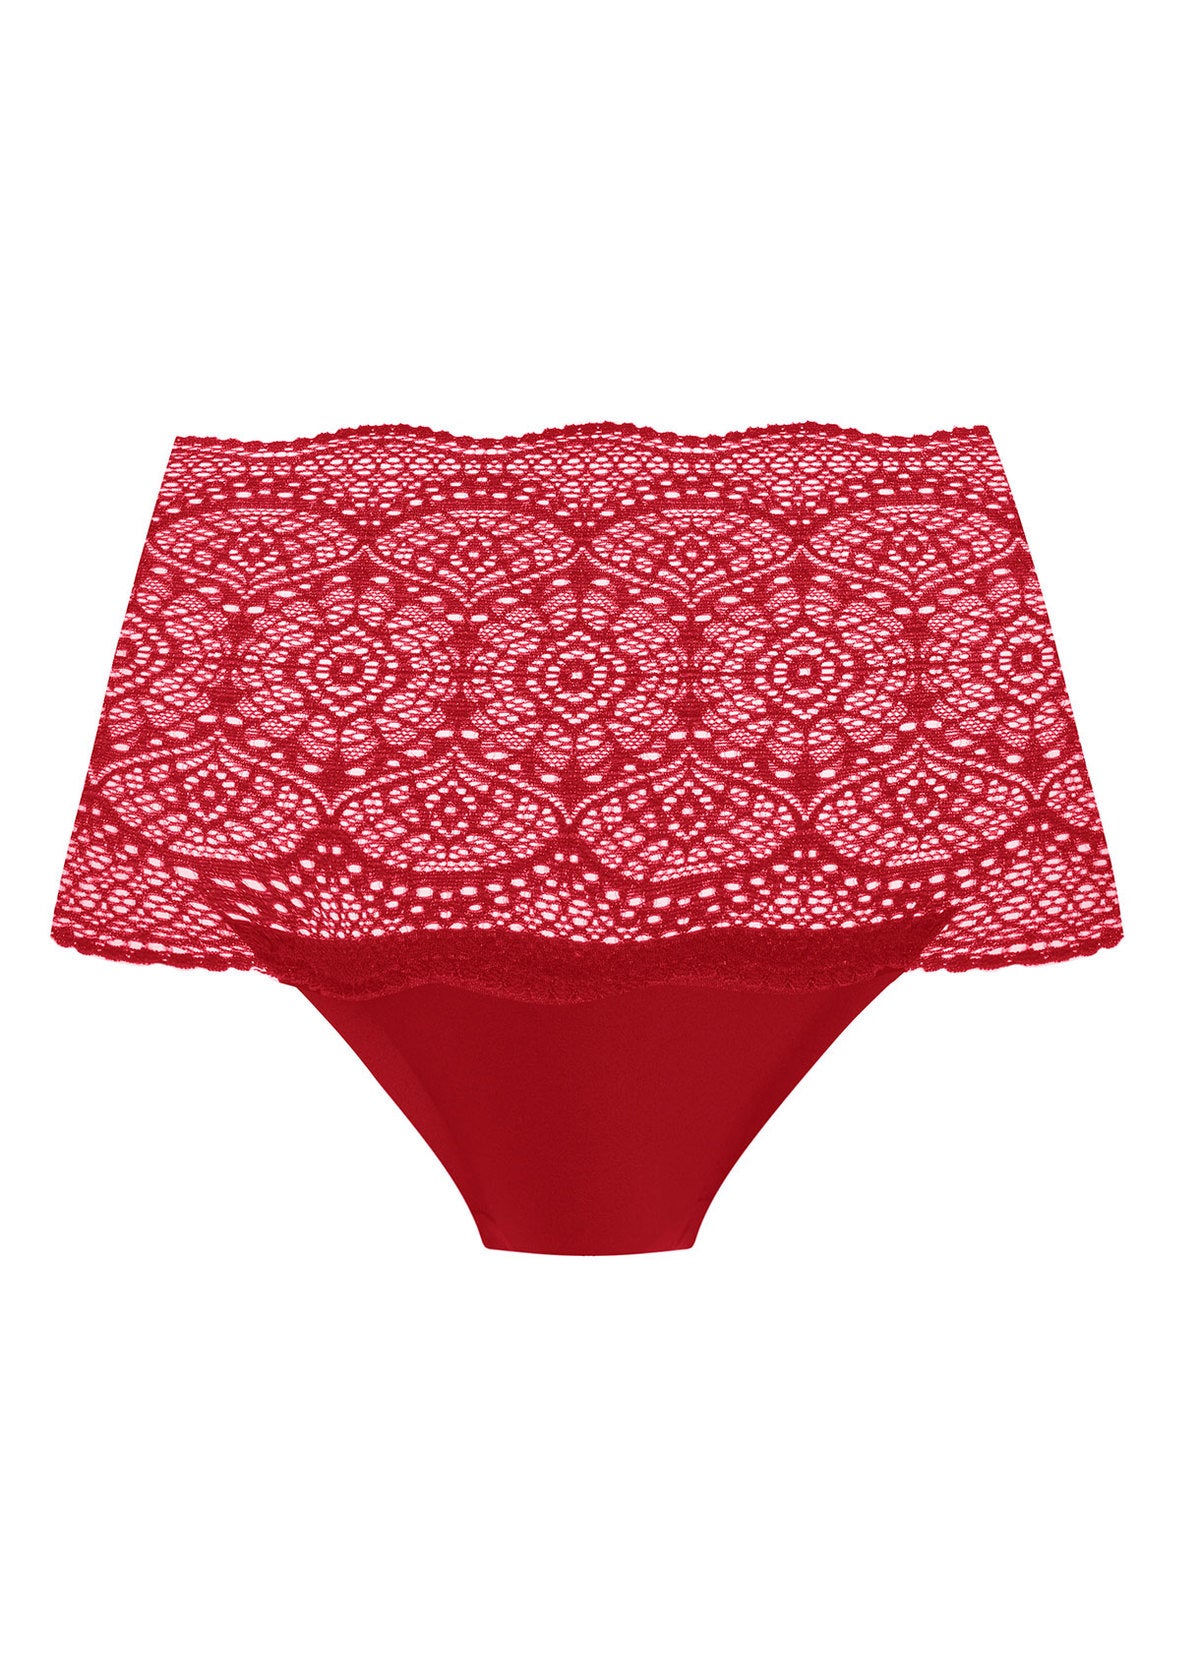 Lace Ease Invisible Stretch Full Brief in Red front view product image